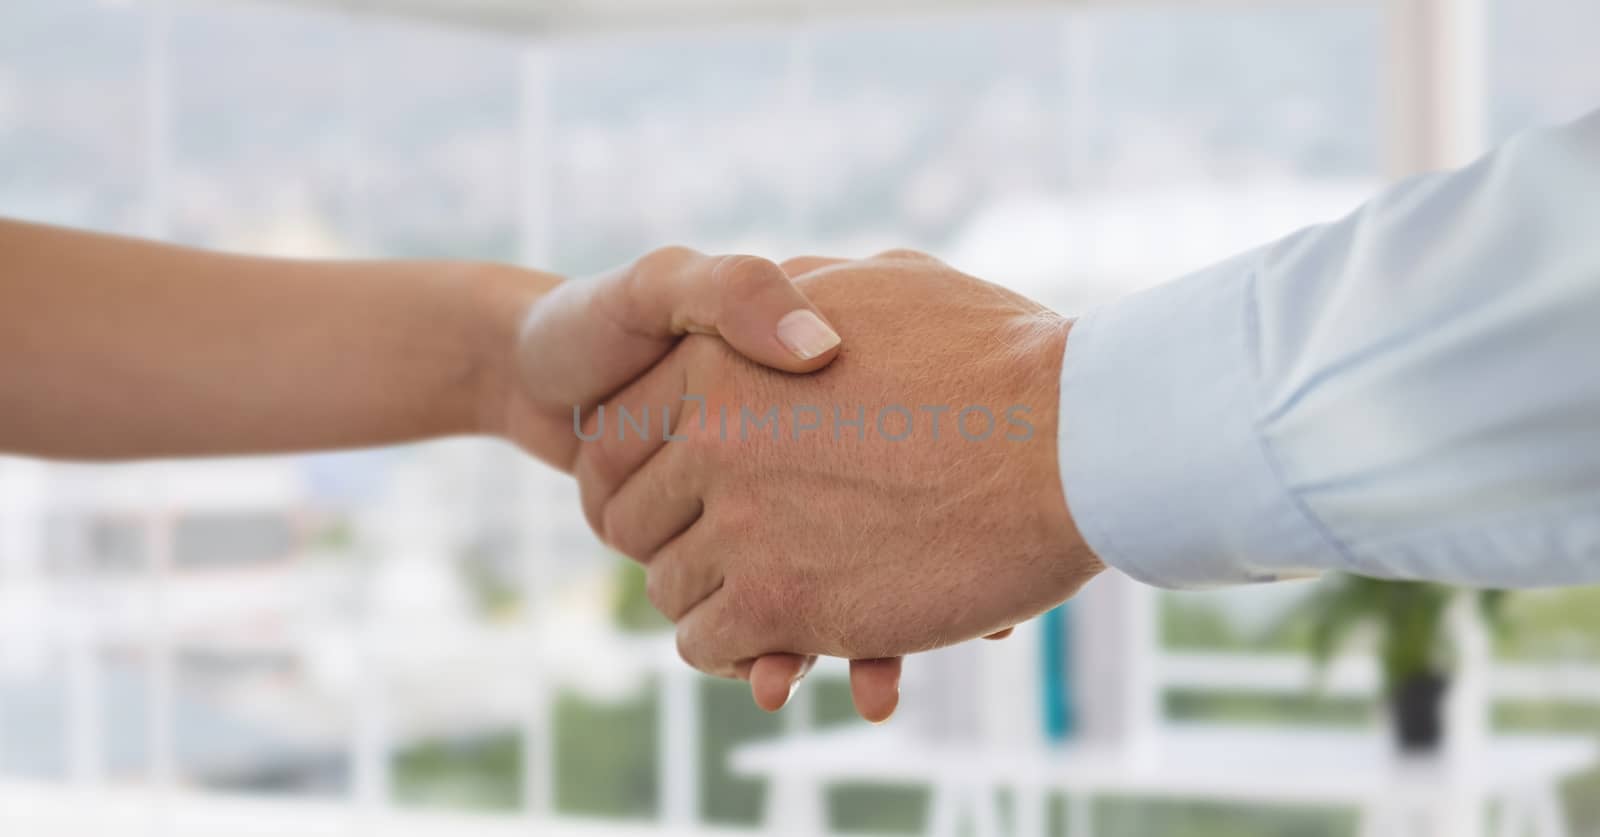 Business people shaking hands against office background by Wavebreakmedia